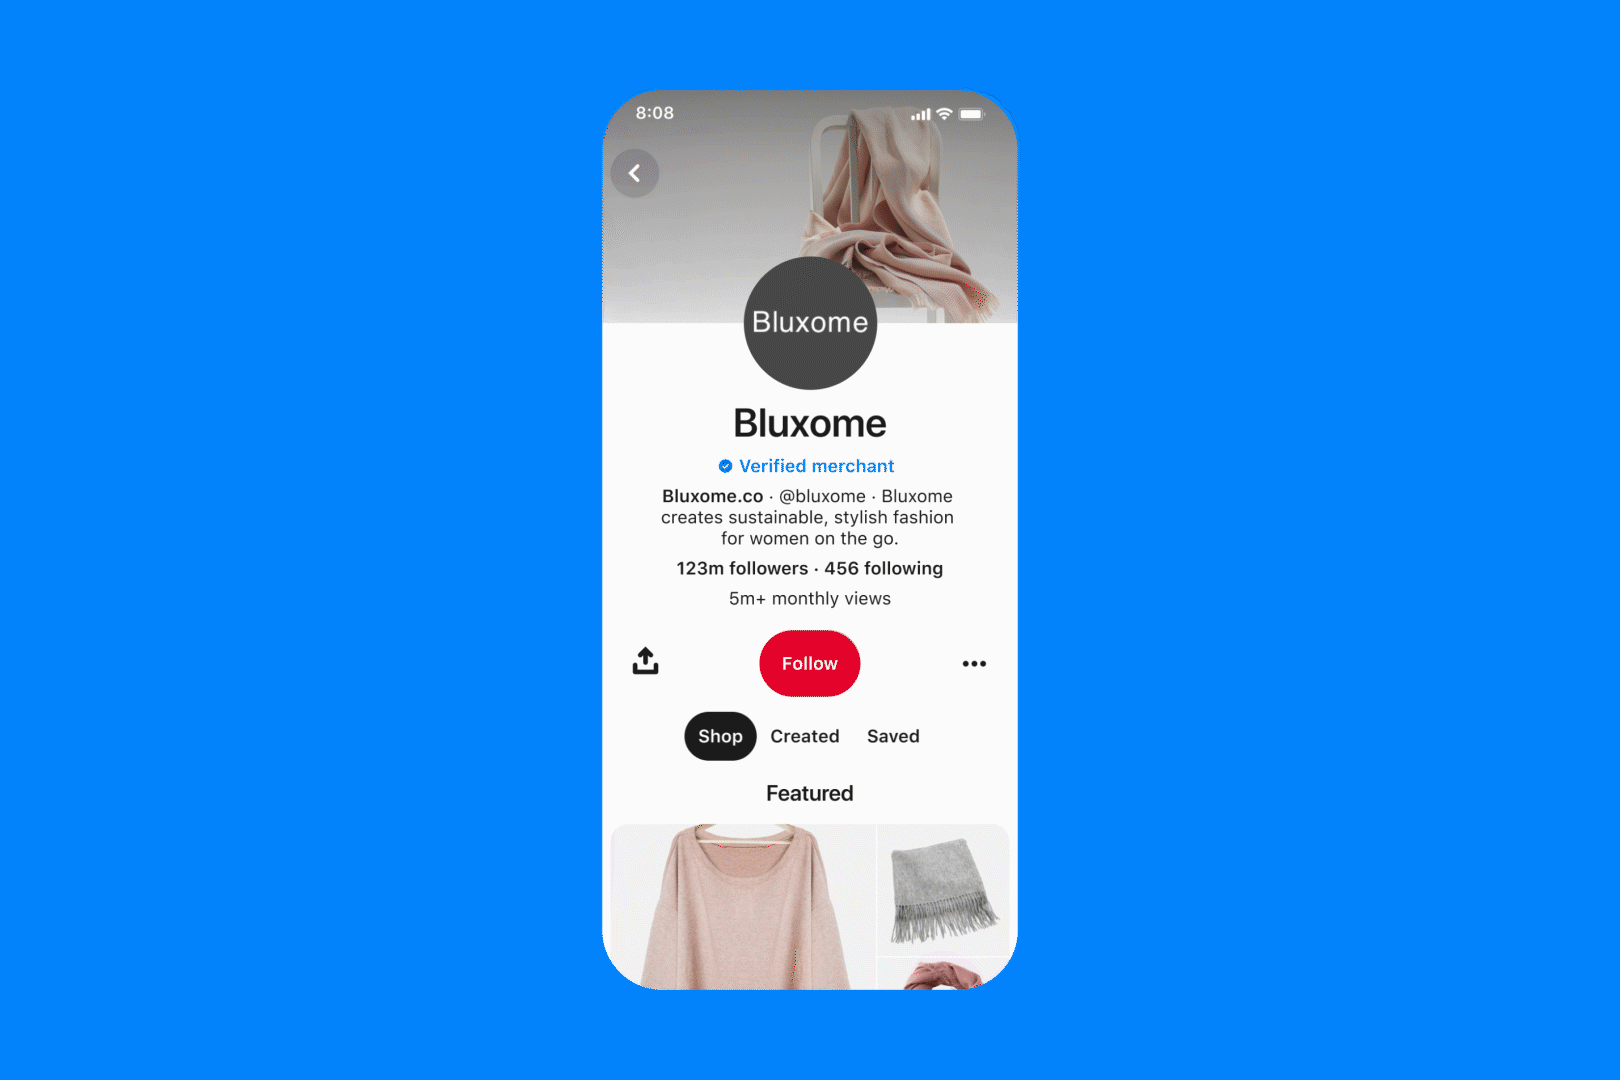 Example of the Pinterest Shop Tab scrolling through clothing options from Bluxome that are for purchase, such as shirts, shoes and jackets. 